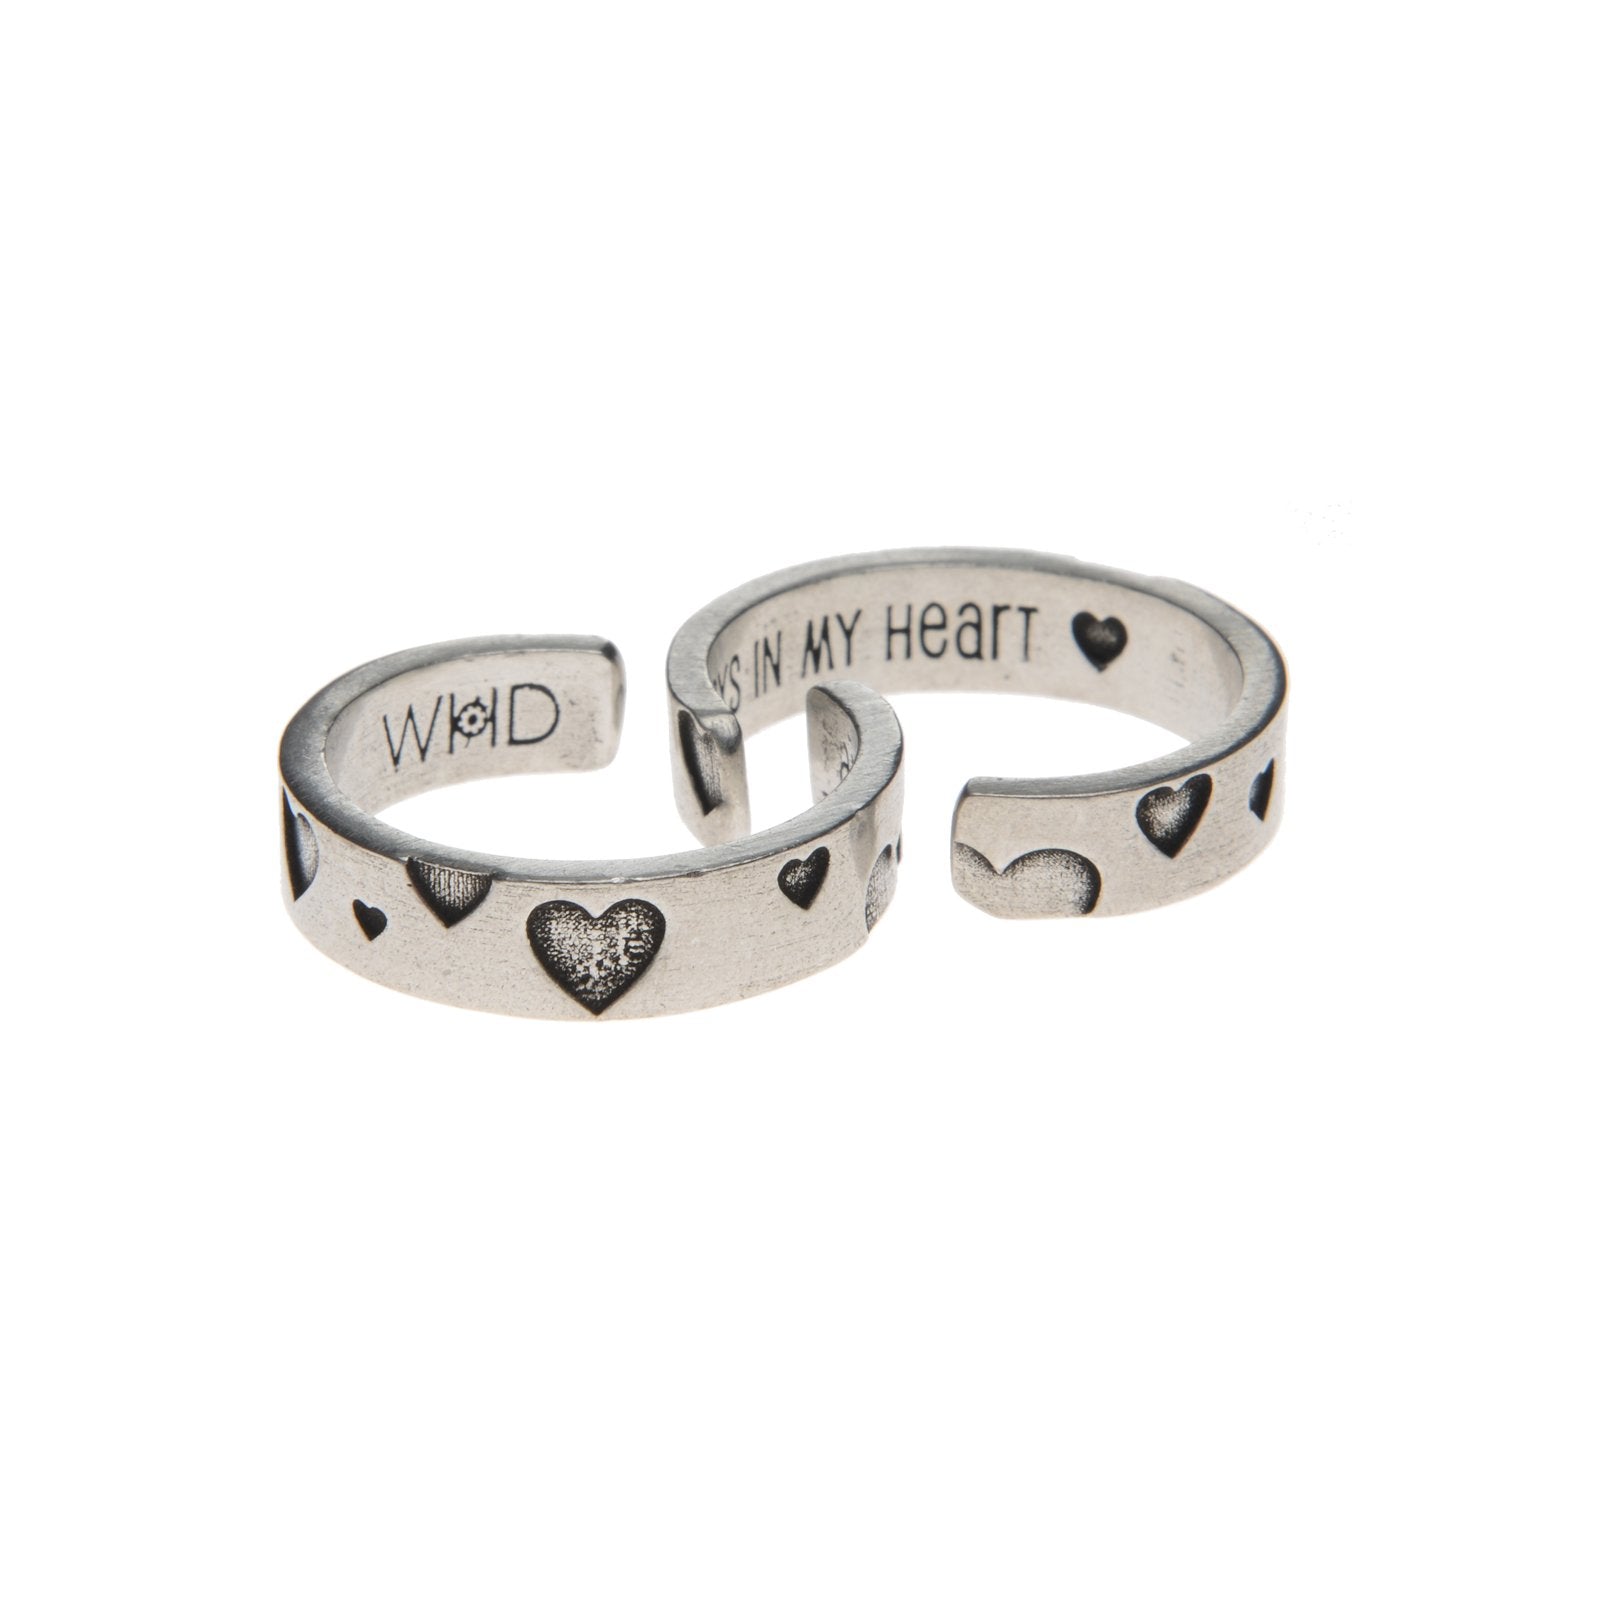 Always in my heart Inspire Ring front and back